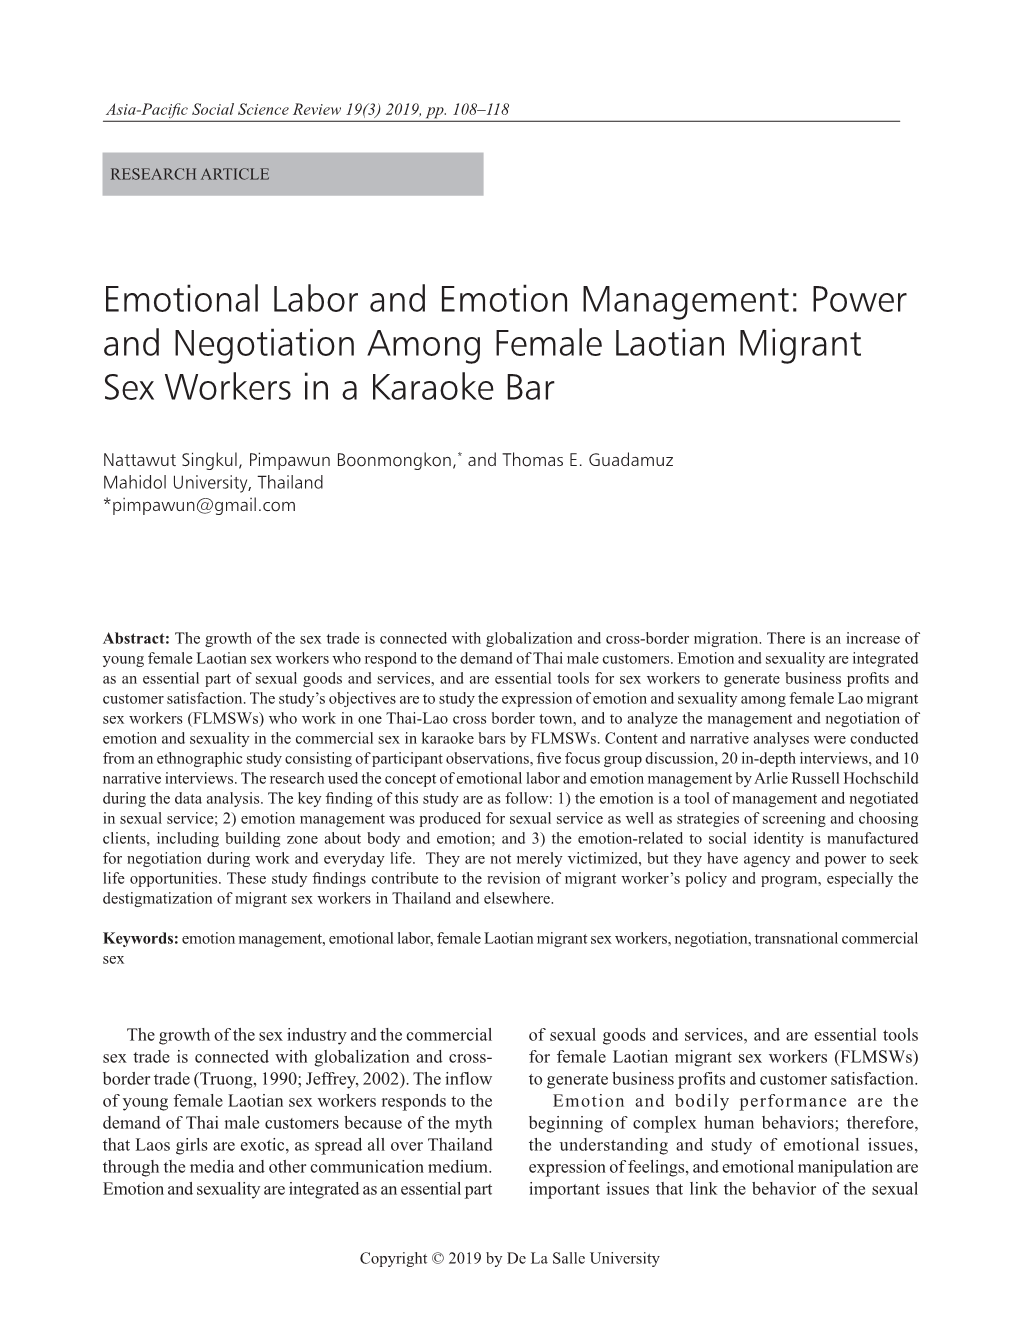 Emotional Labor and Emotion Management: Power and Negotiation Among Female Laotian Migrant Sex Workers in a Karaoke Bar